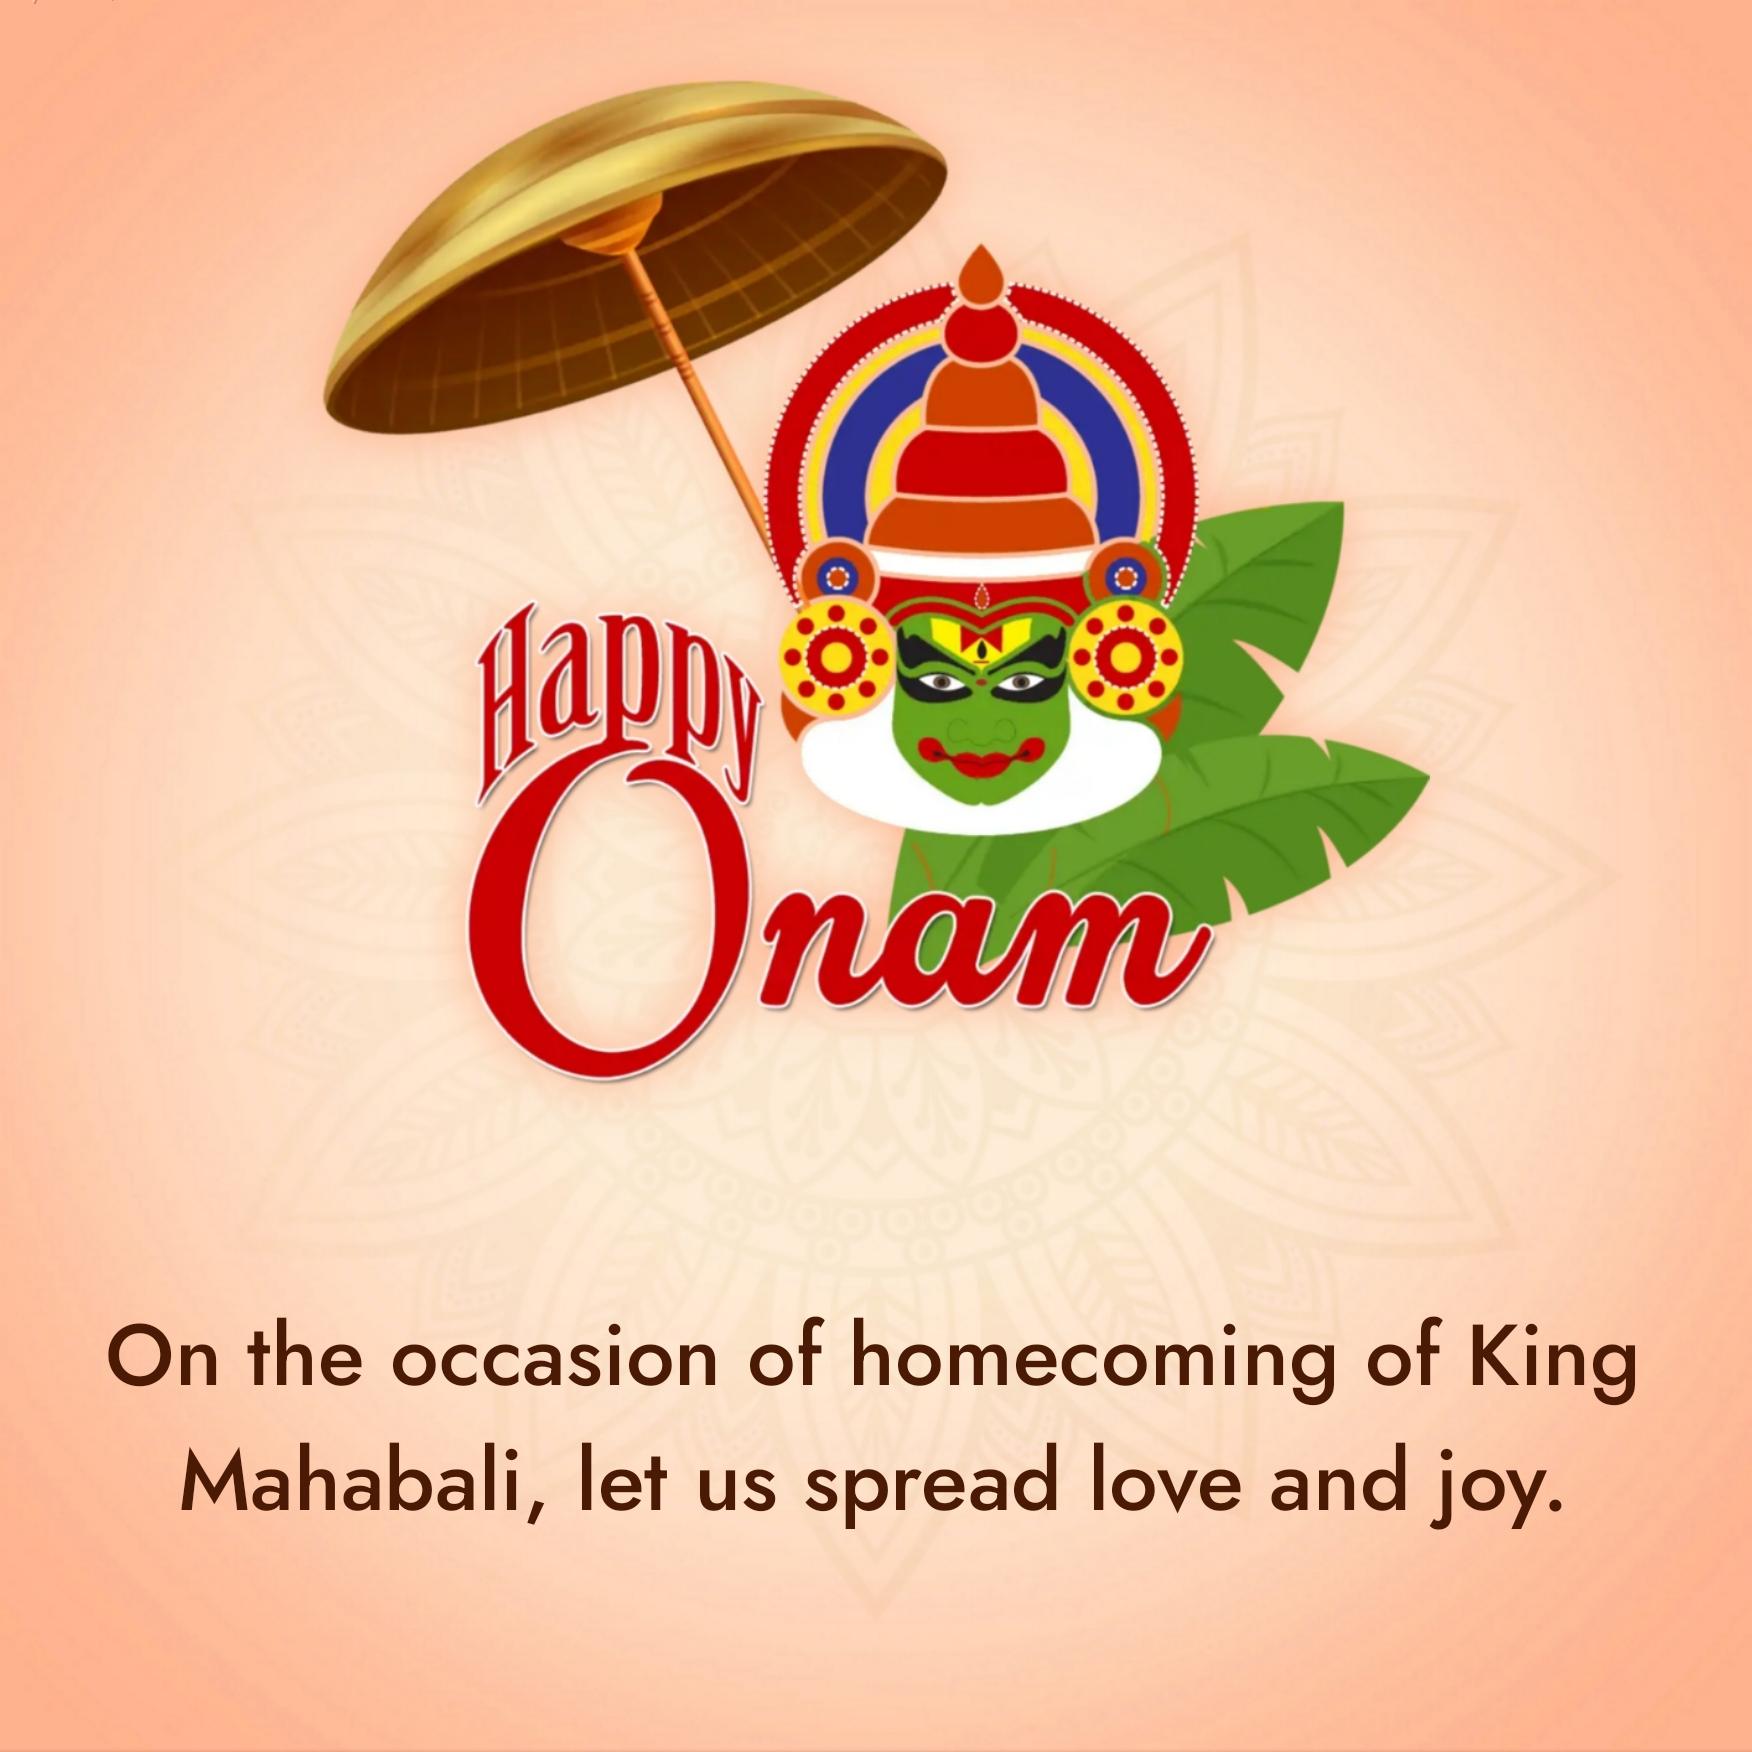 On the occasion of homecoming of King Mahabali let us spread love